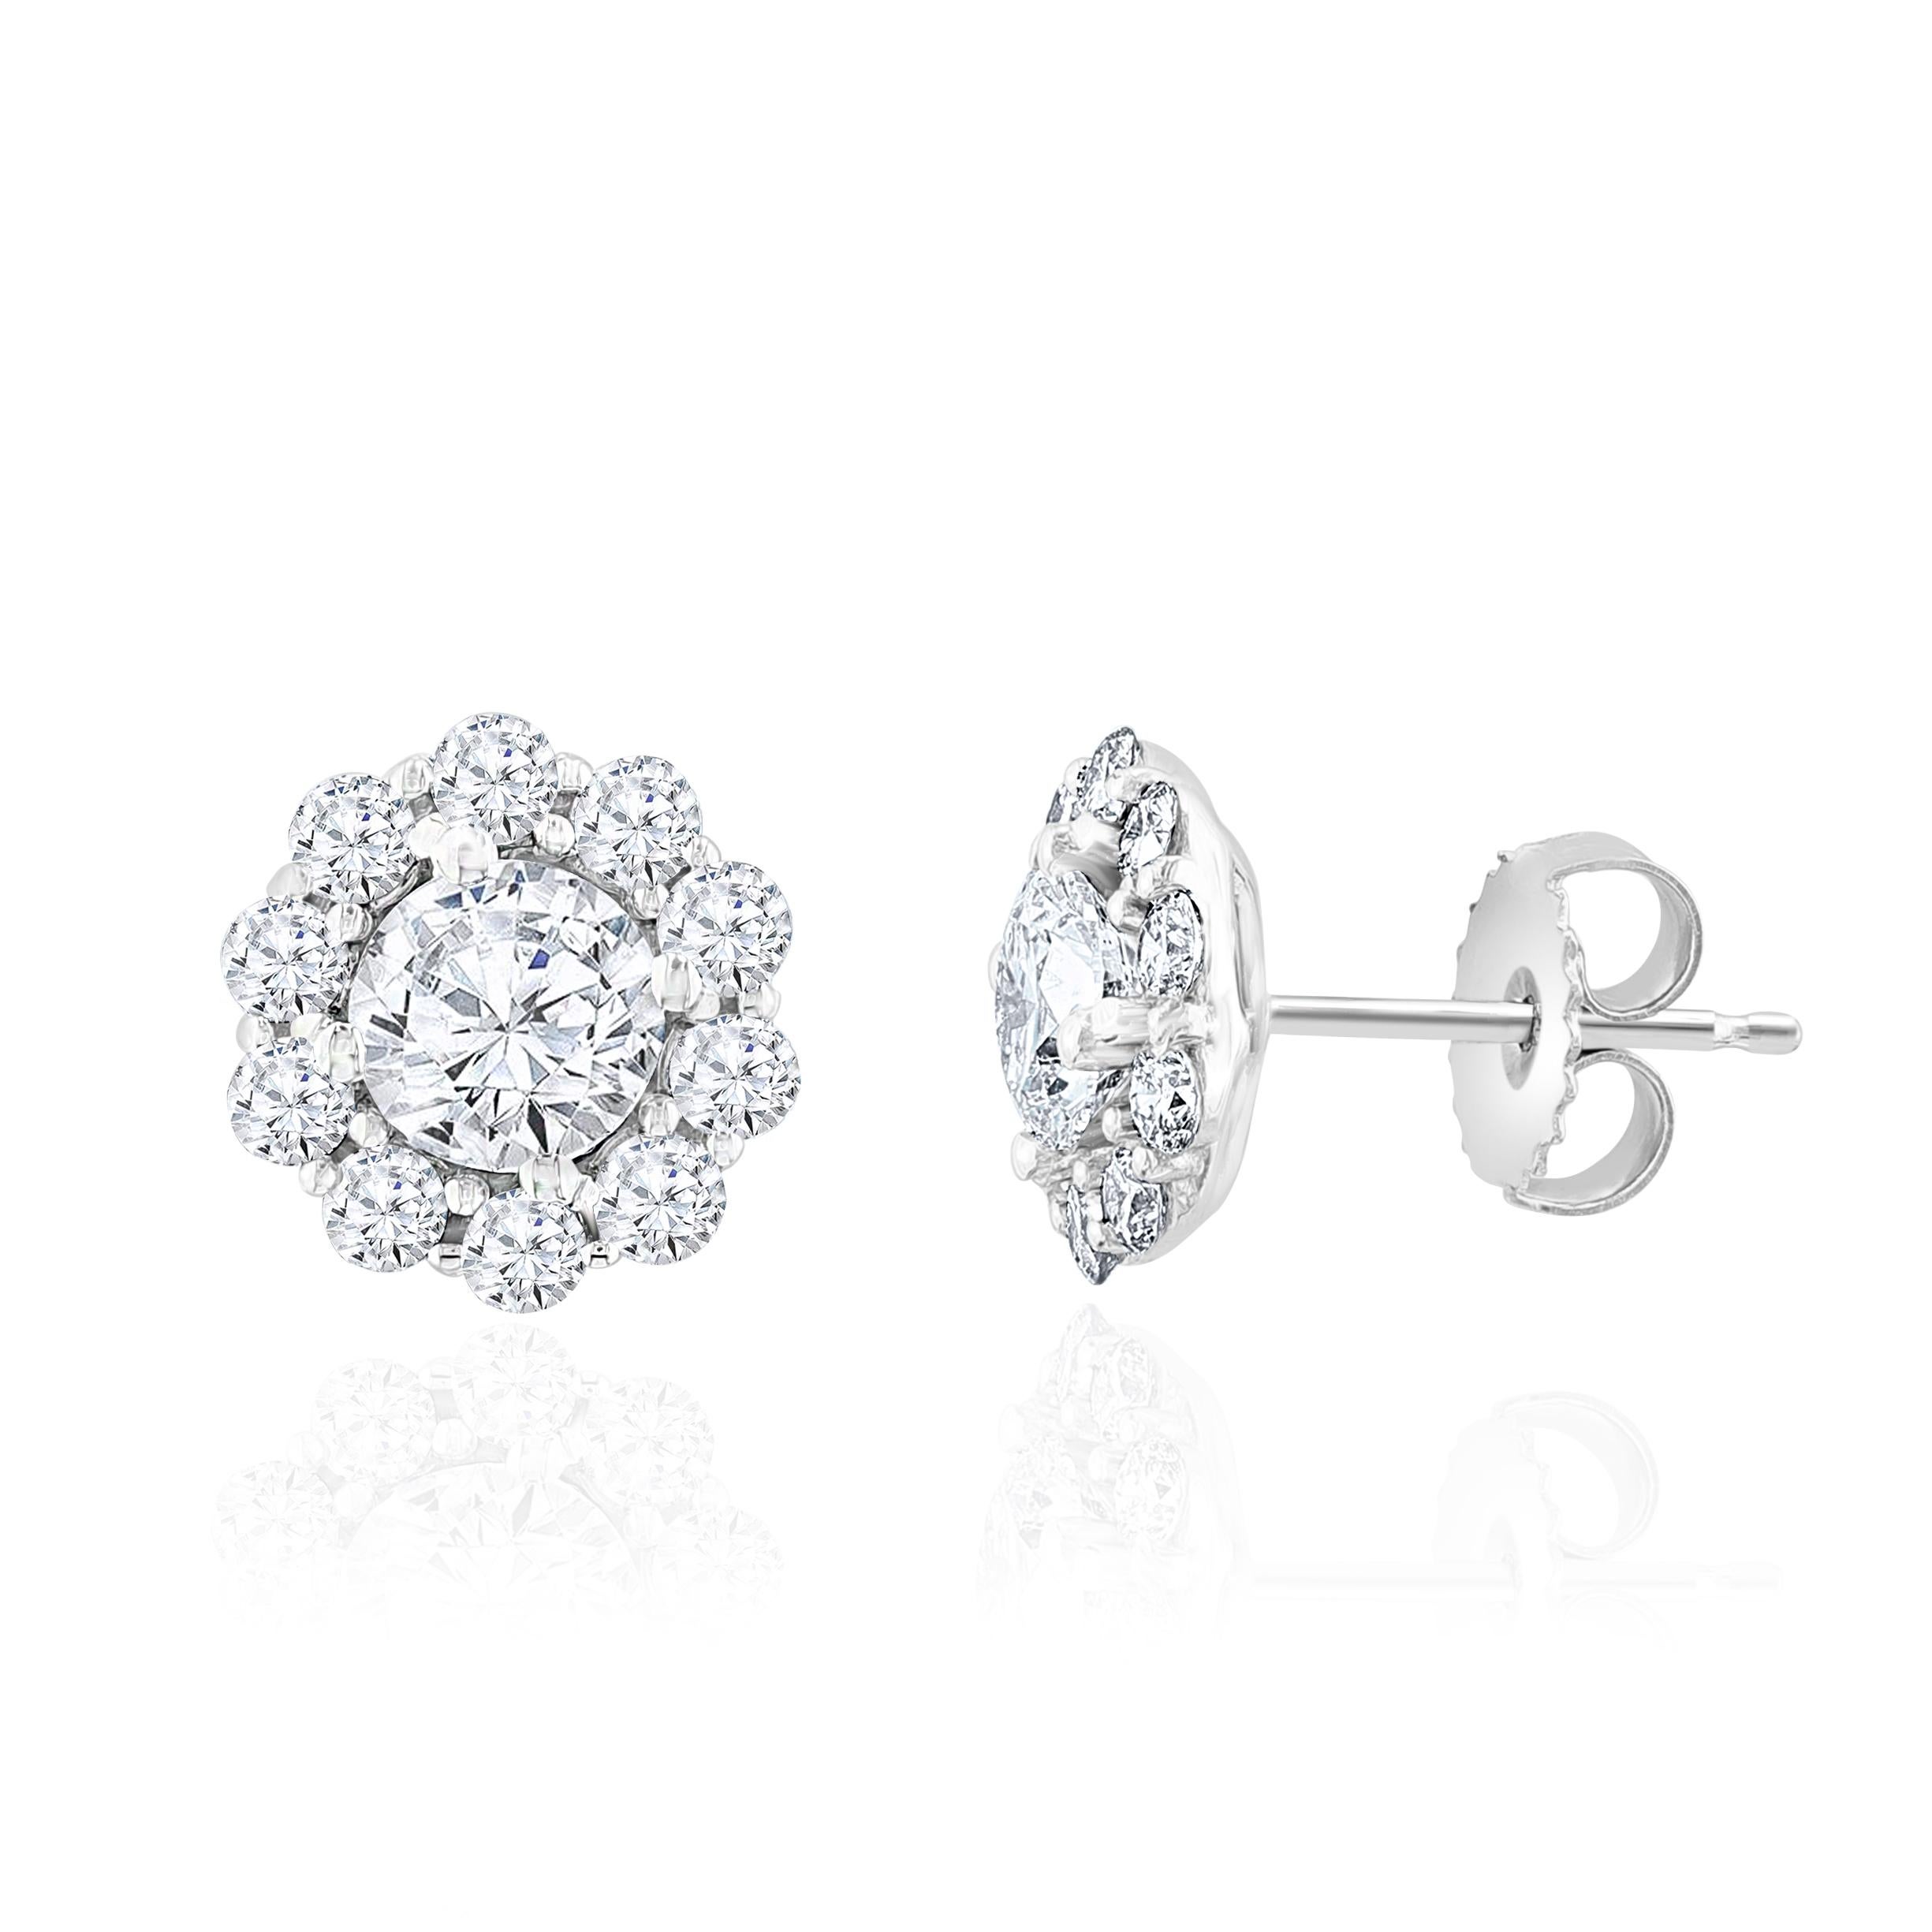 2.38 Carat Diamond Cluster Earrings.

Set in 18 Karat White Gold.
Diamonds are of H color and SI Clarity.
